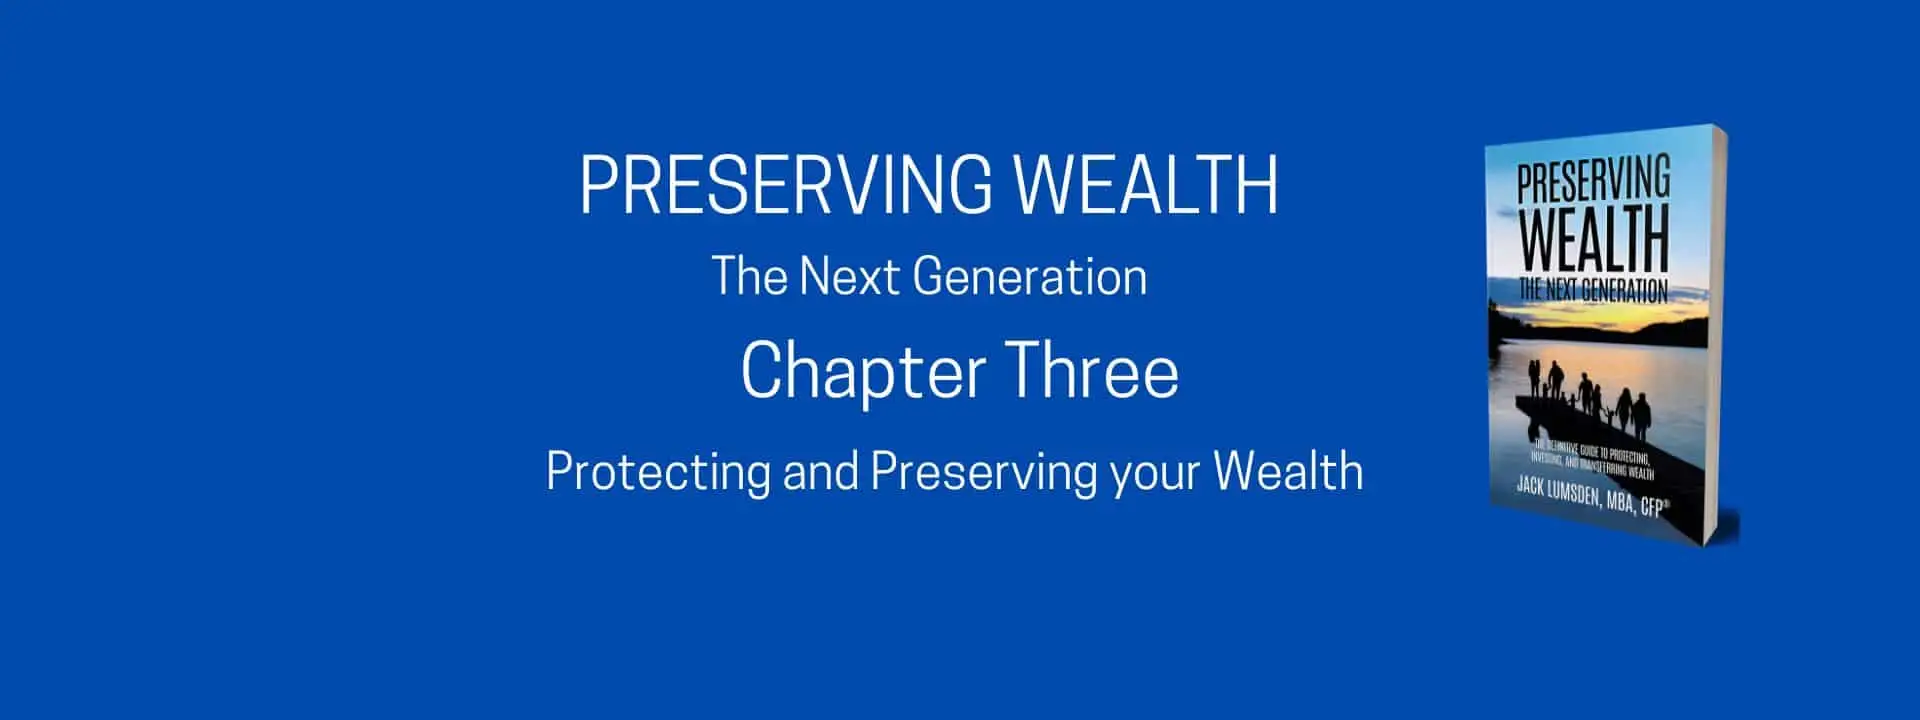 Chapter Three of Preserving Wealth